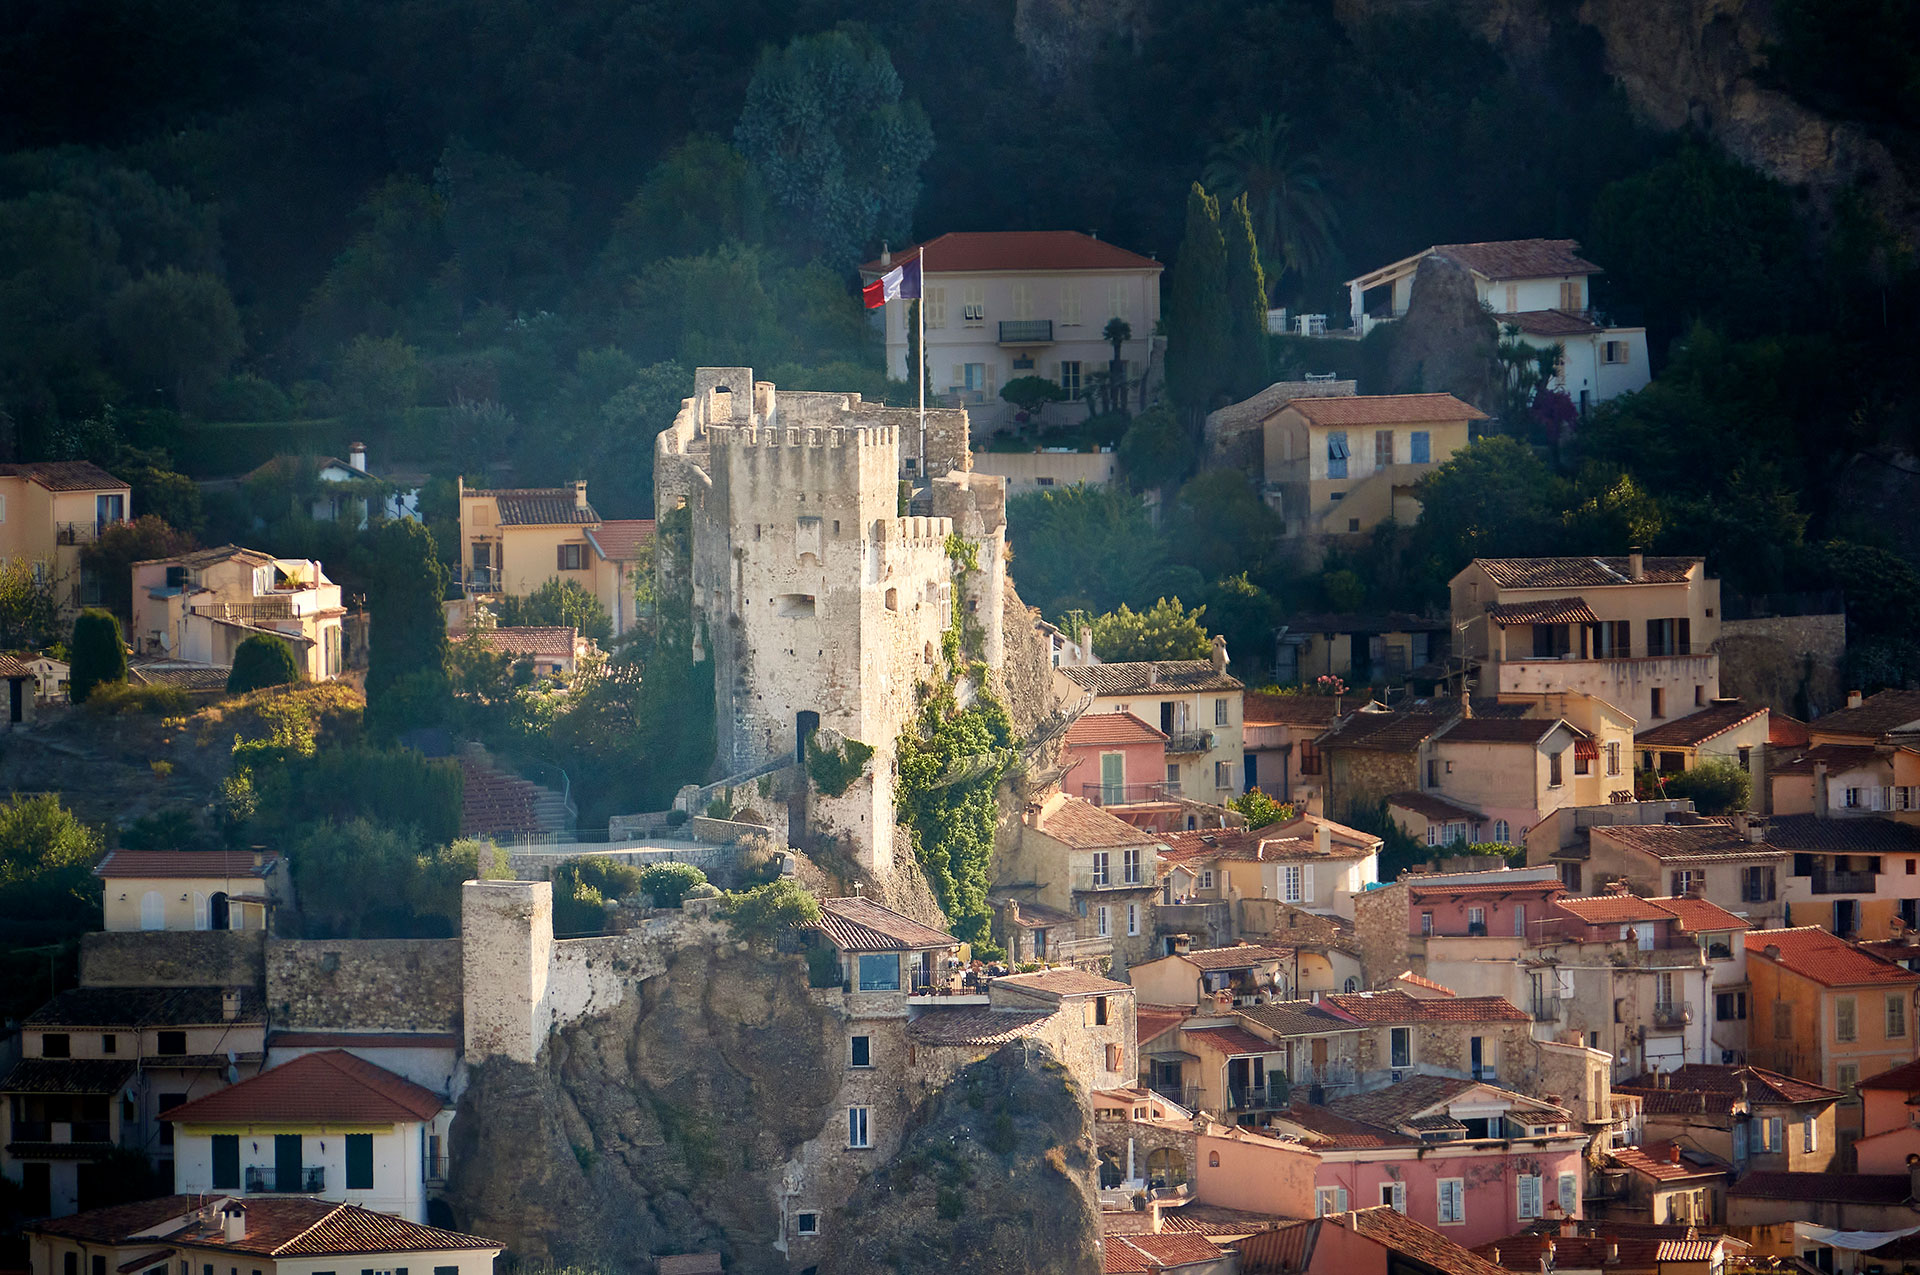 The Maybourne Riviera - Roquebrune Cap Martin view with castle